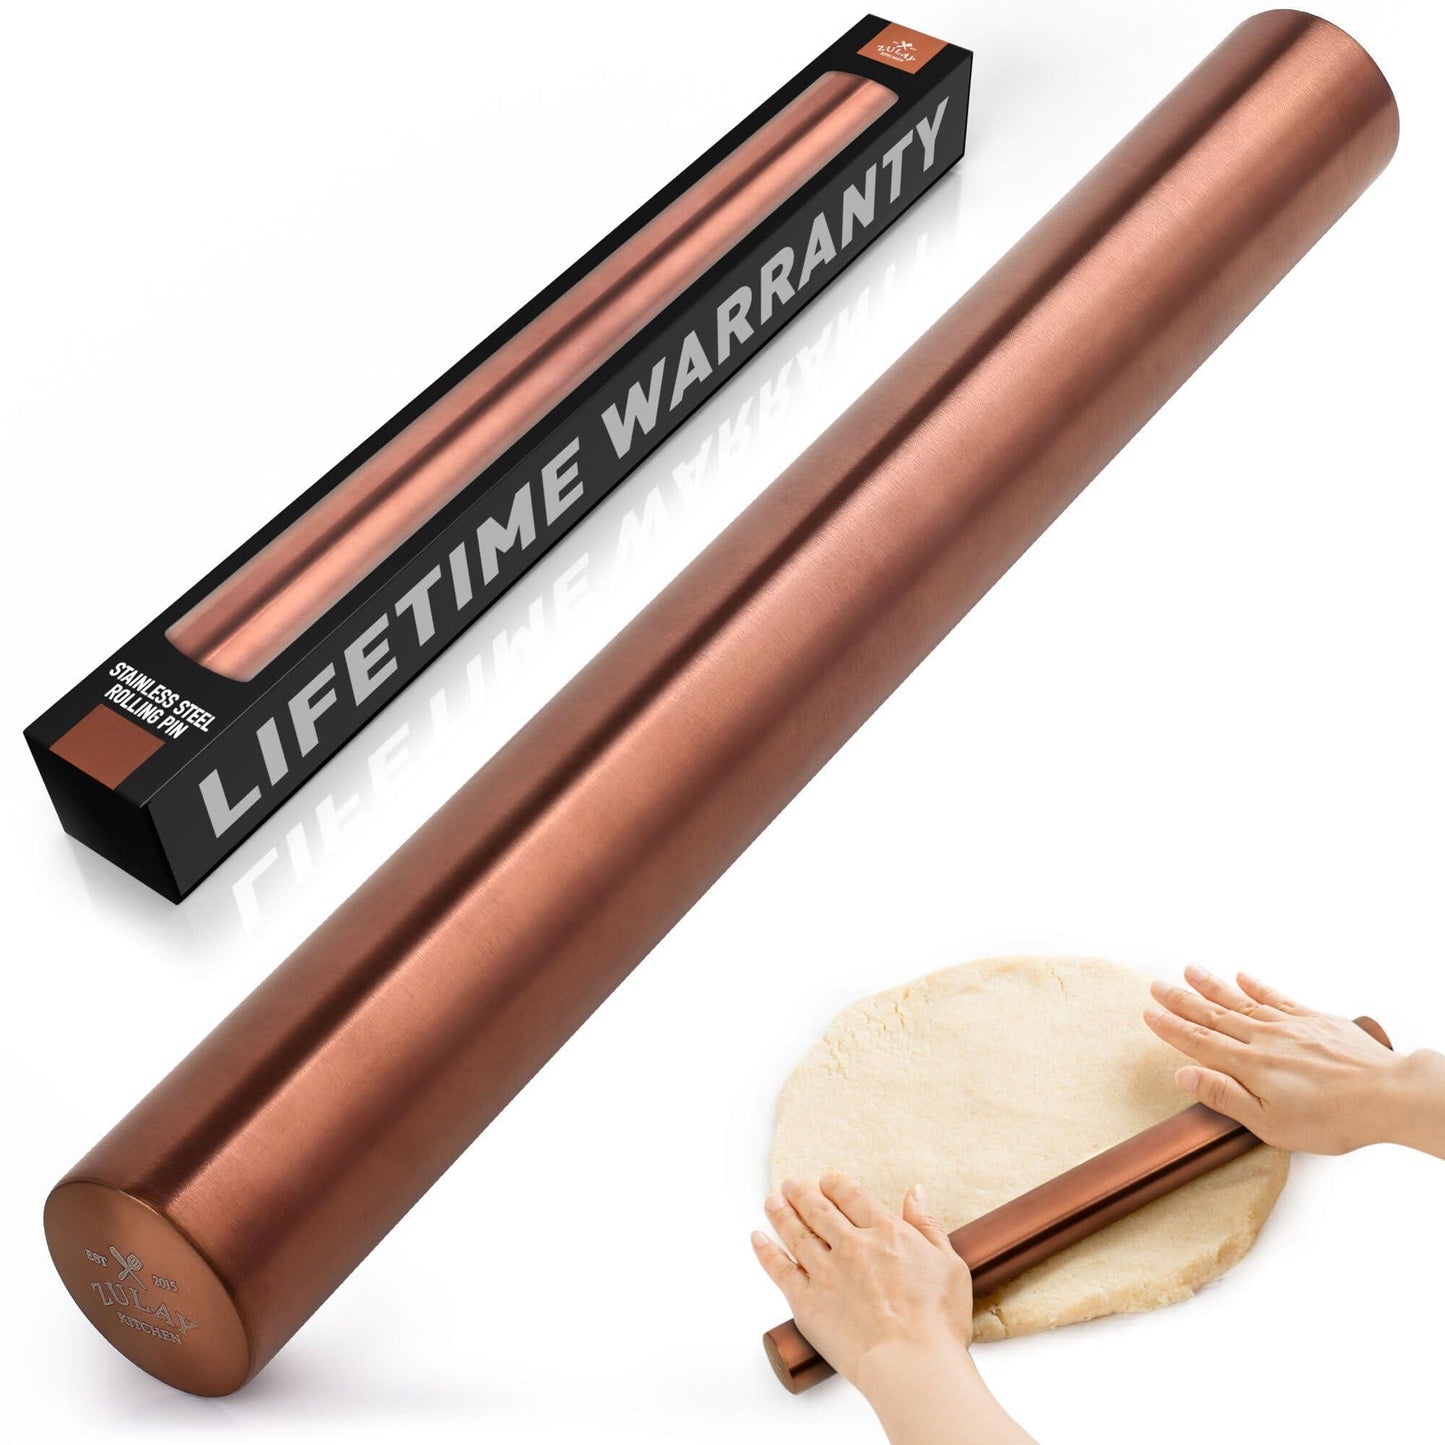 Zulay Kitchen 15.9 inch Professional Stainless Steel Rolling Pin - Lightweight Metal French Rolling Pin - Perfect for Baking, Fondant, Pizza Dough Roller, Dumpling - Copper - CookCave